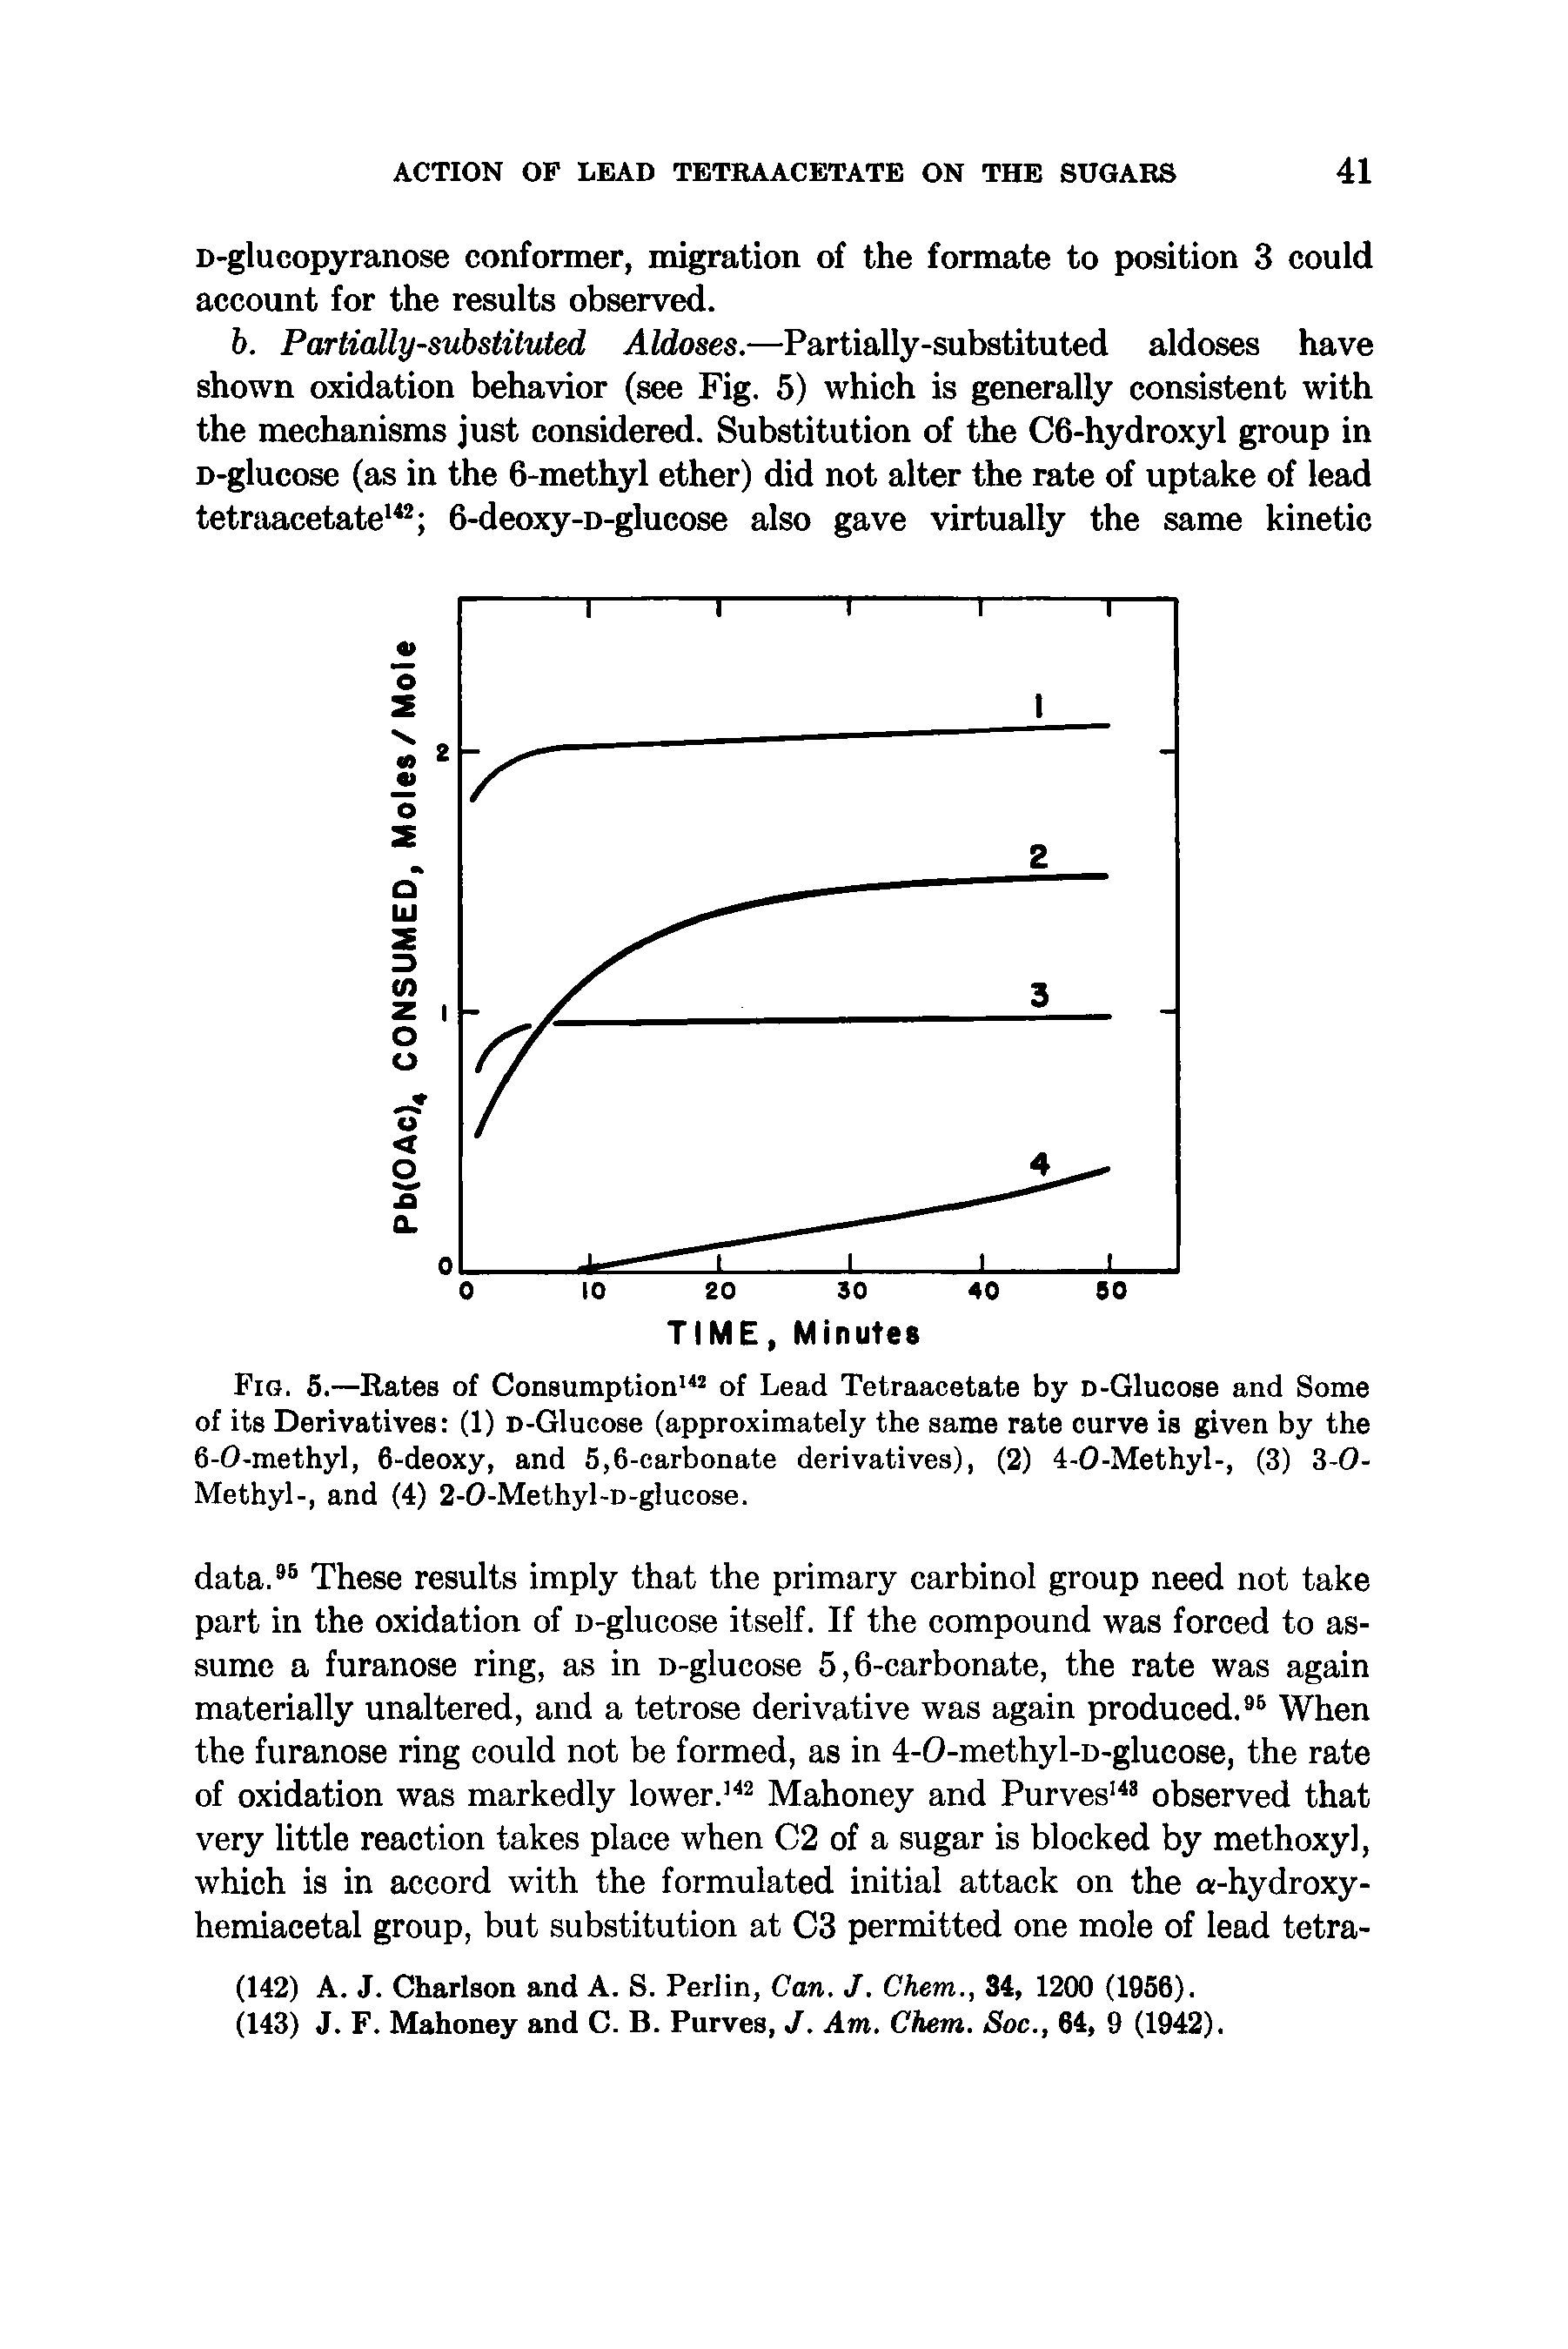 Fig. 5.—Rates of Consumption142 of Lead Tetraacetate by D-Glucose and Some of its Derivatives (1) D-Glucose (approximately the same rate curve is given by the 6-O-methyl, 6-deoxy, and 5,6-carbonate derivatives), (2) 4-0-Methyl-, (3) 3-0-Methyl-, and (4) 2-0-Methyl-D-glucose.